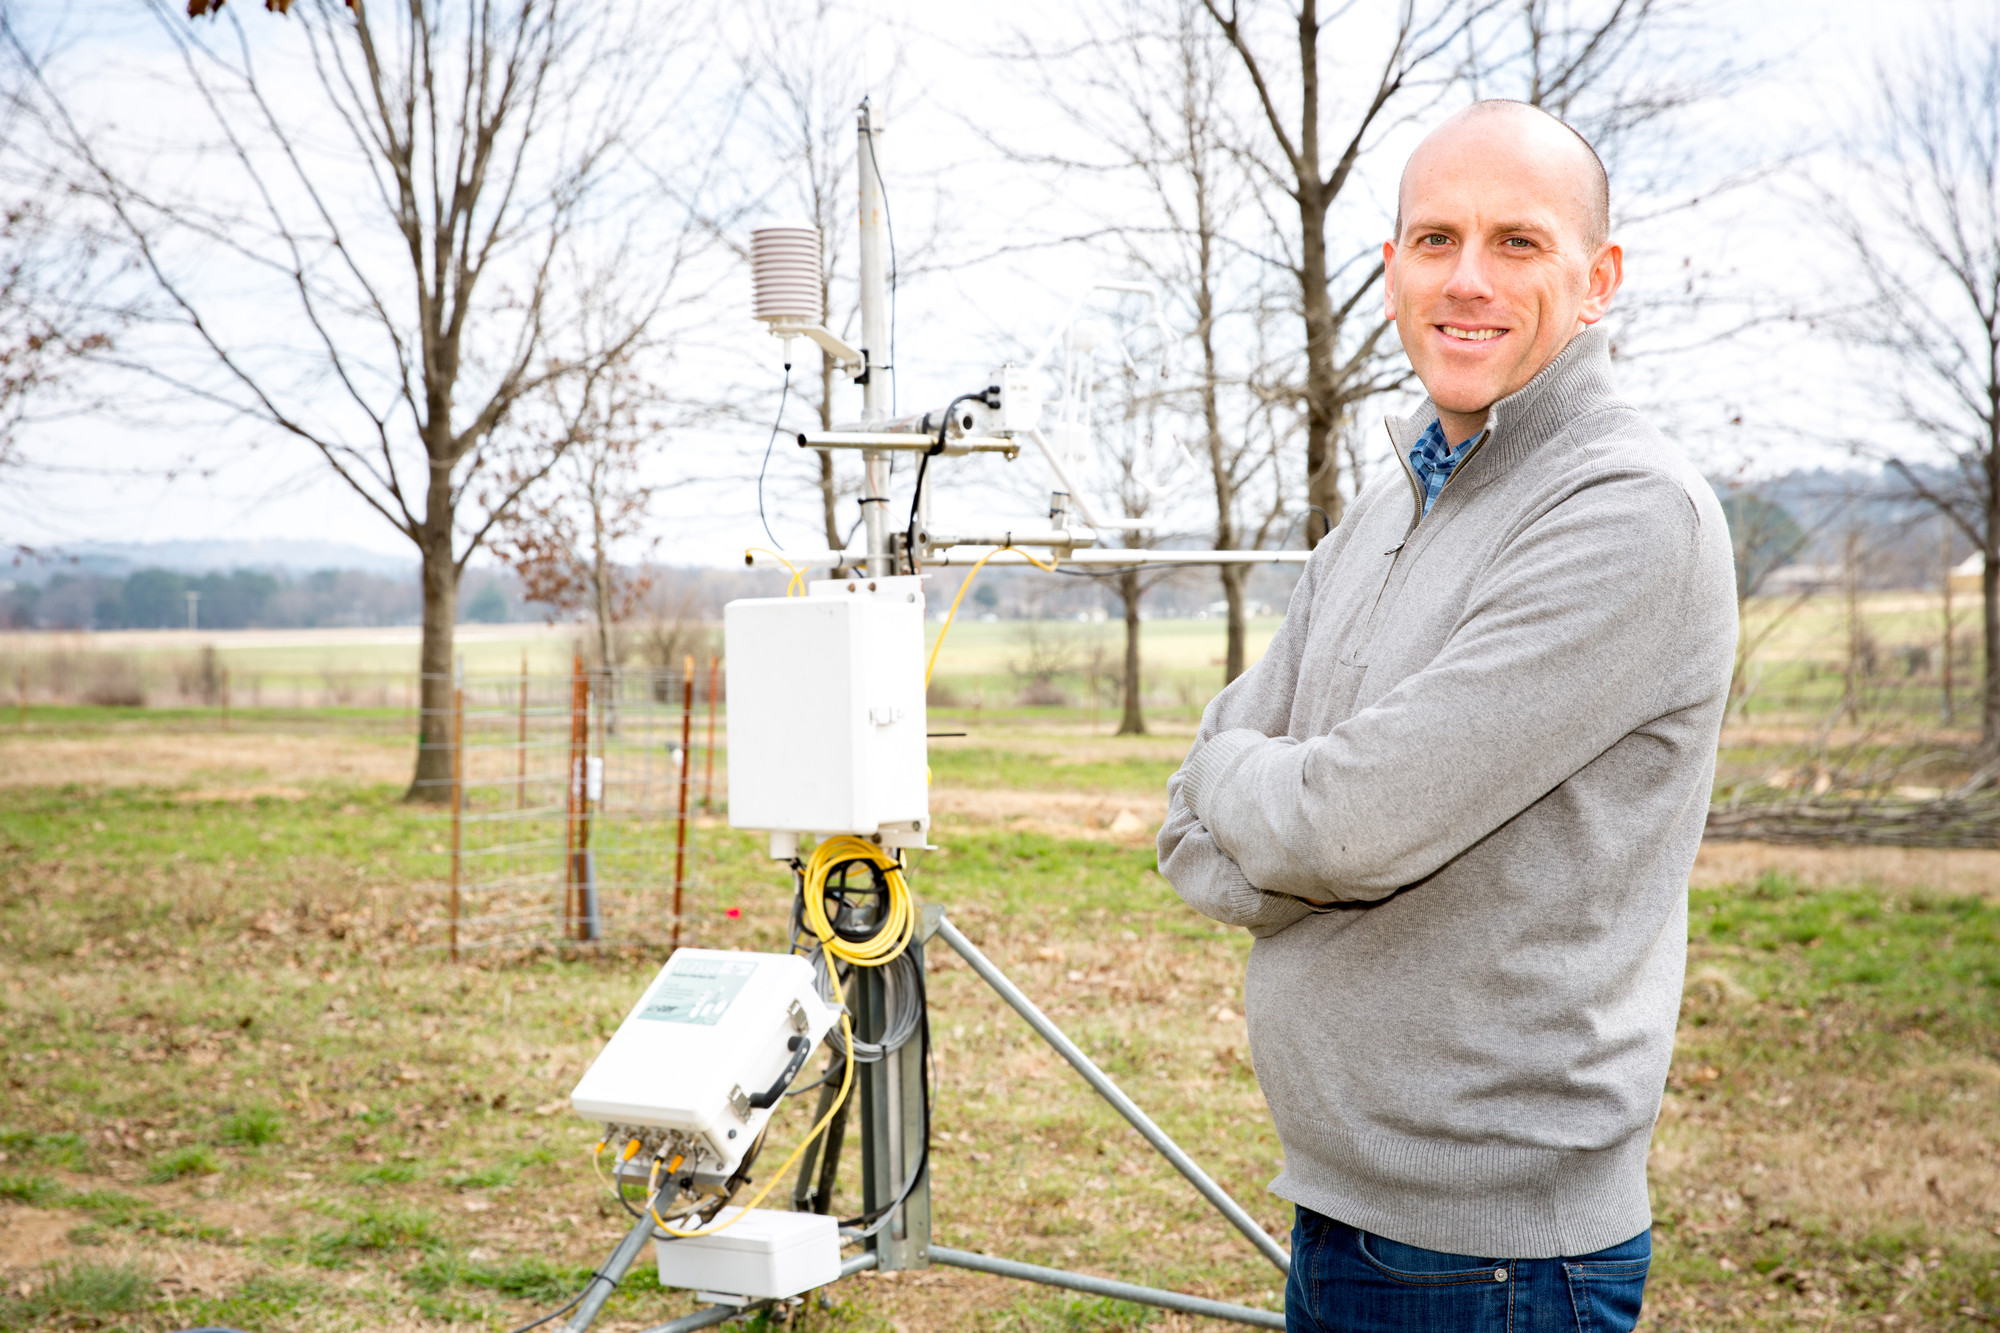 Ben Runkle, an assistant professor of biological and agricultural engineering at the University of Arkansas, is studying how to reduce the environmental impact of growing rice, one of the world’s most produced foods. He received a National Science Foundation CAREER award.